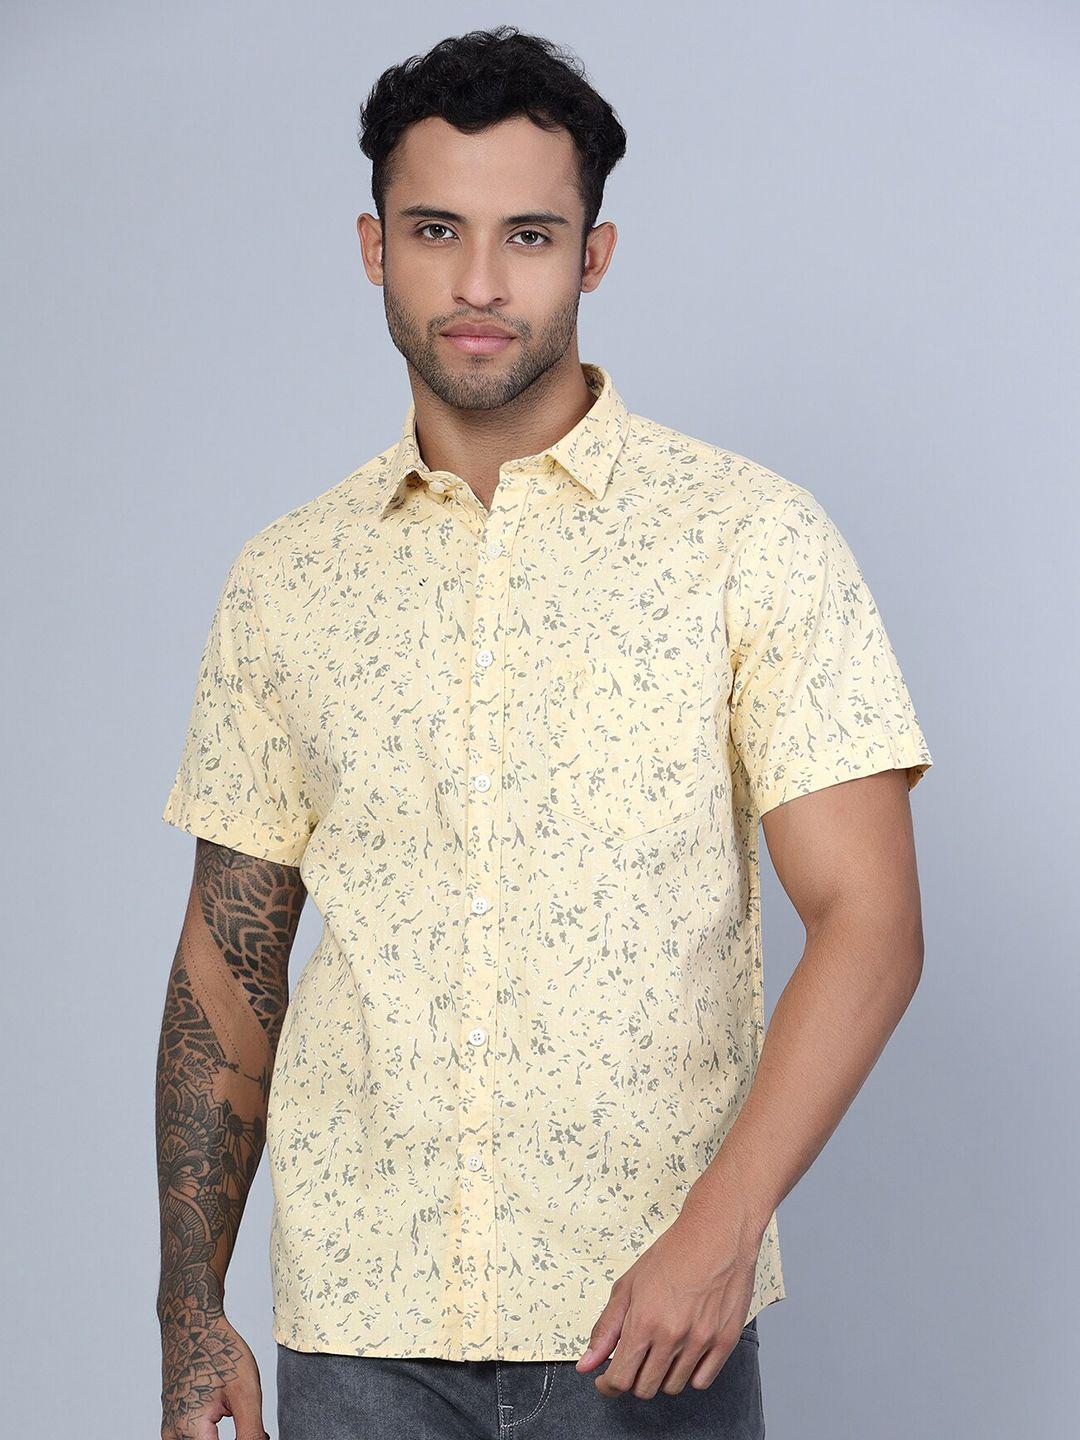 cantabil smart floral printed cotton casual shirt